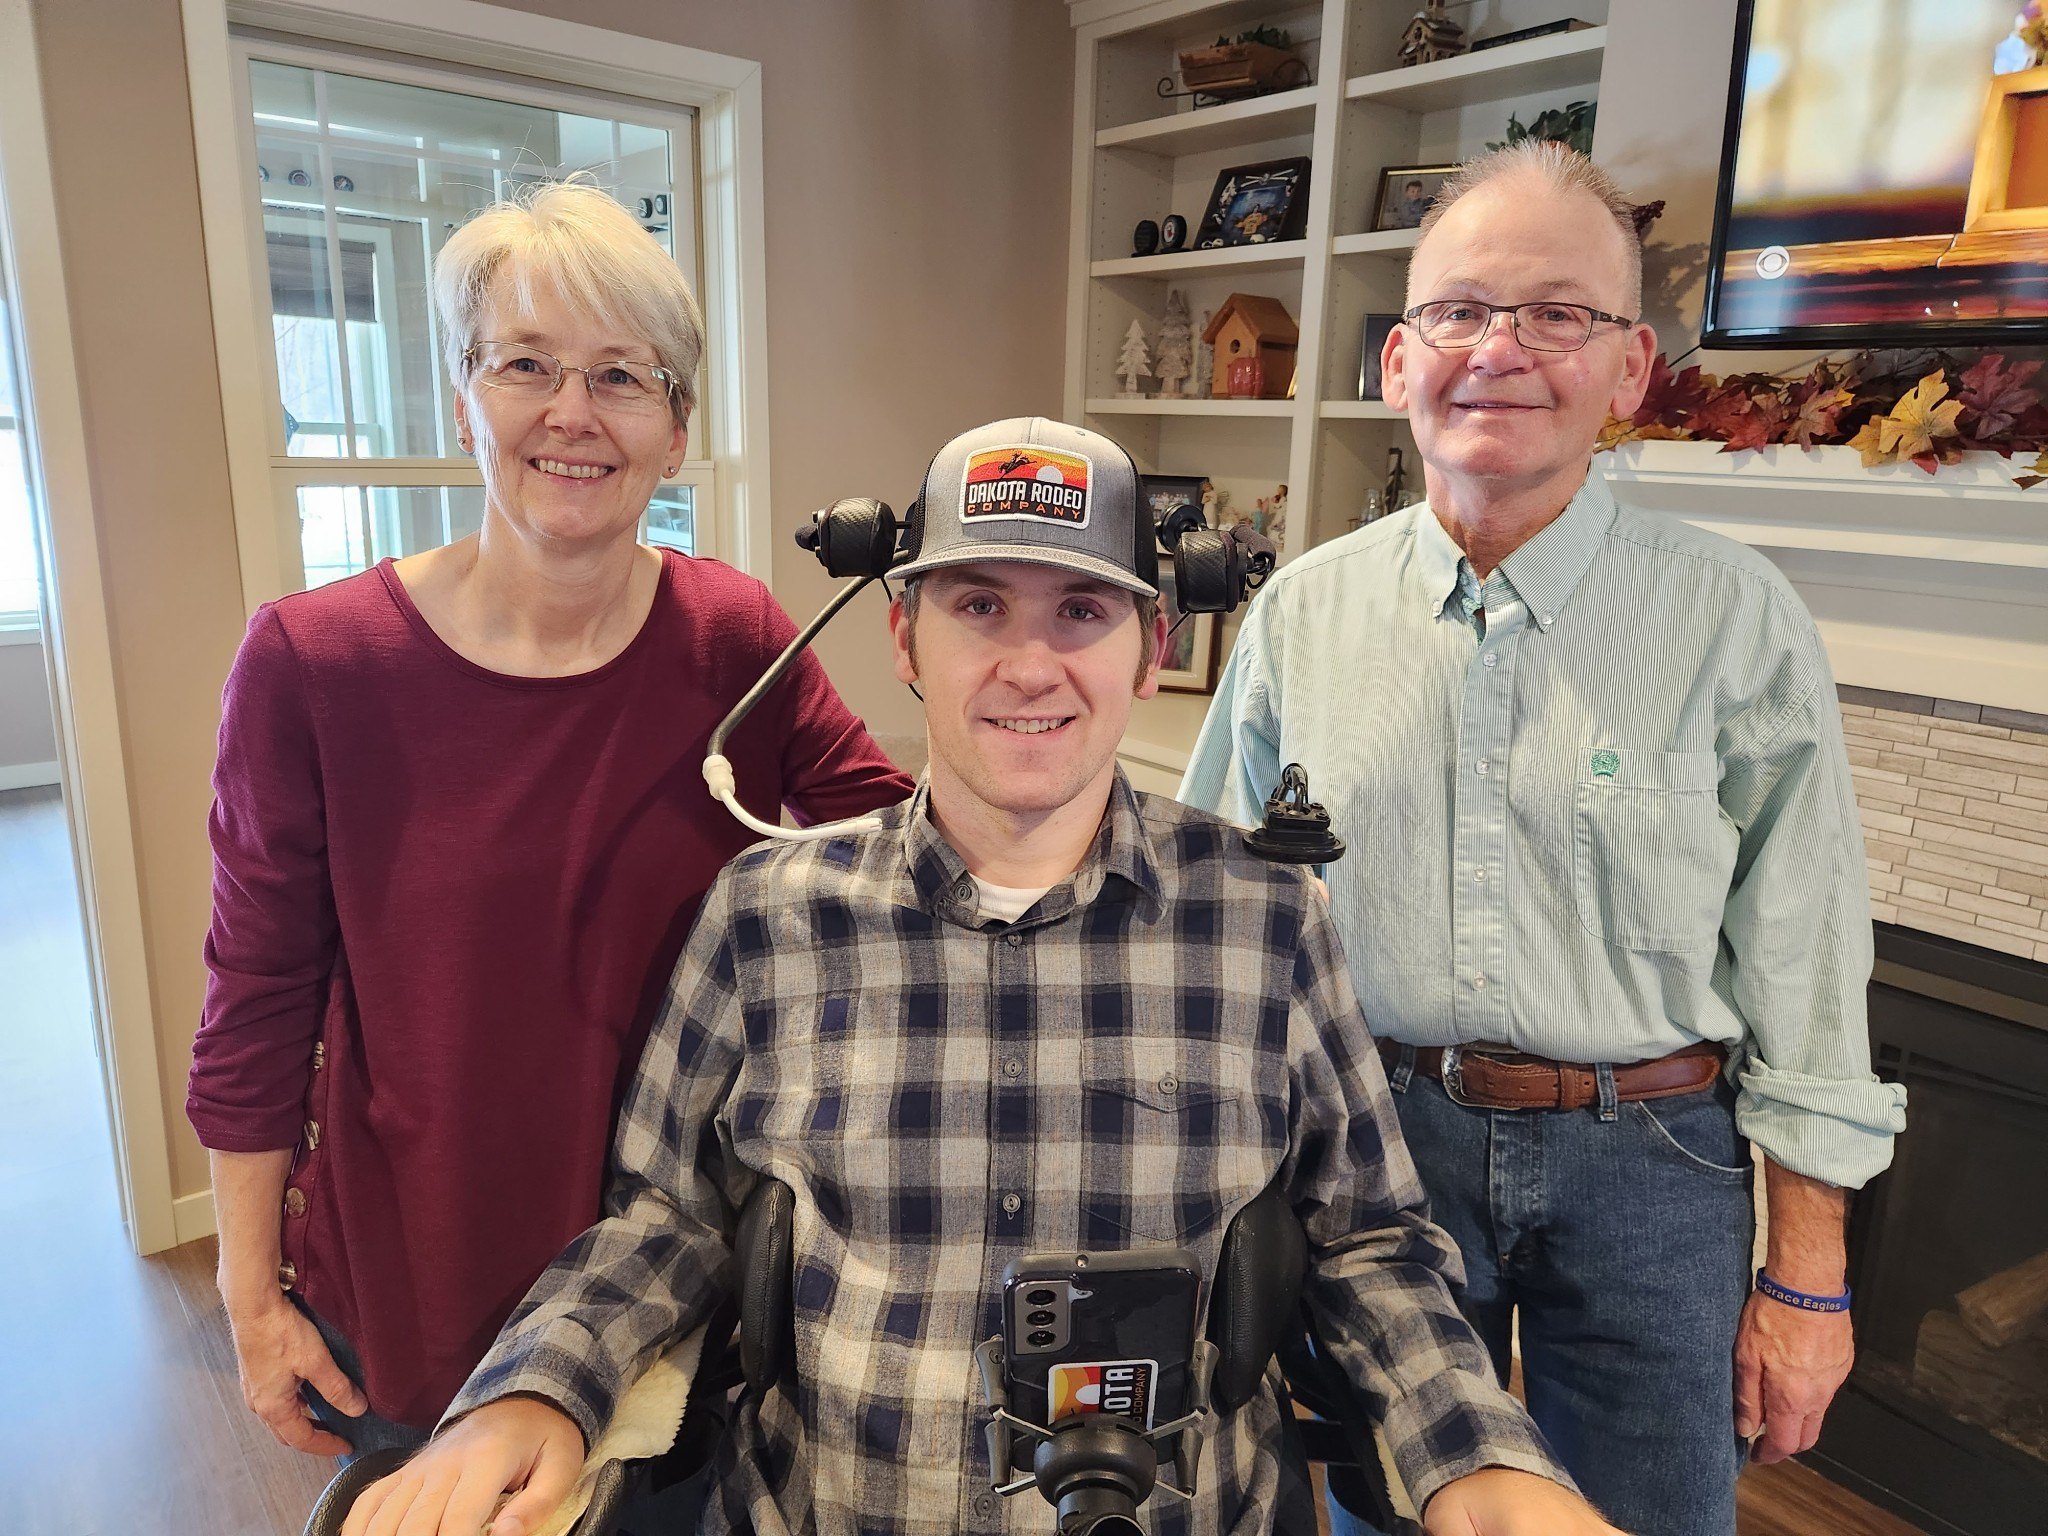 Matt Olson, a native of Isanti, Minn., is pictured with his parents, Doug and Sue Olson, in an undated photo. In February 2016, a junior hockey game left Olson, 20 years old at the time, paralyzed from the chest down. Now 26, Olson credits faith, family, community and his alma mater, Totino-Grace Catholic High School in Fridley, Minn., with carrying him through the many challenges he has faced as a result of his life-altering injury.(OSV News photo/courtesy Matt Olson)